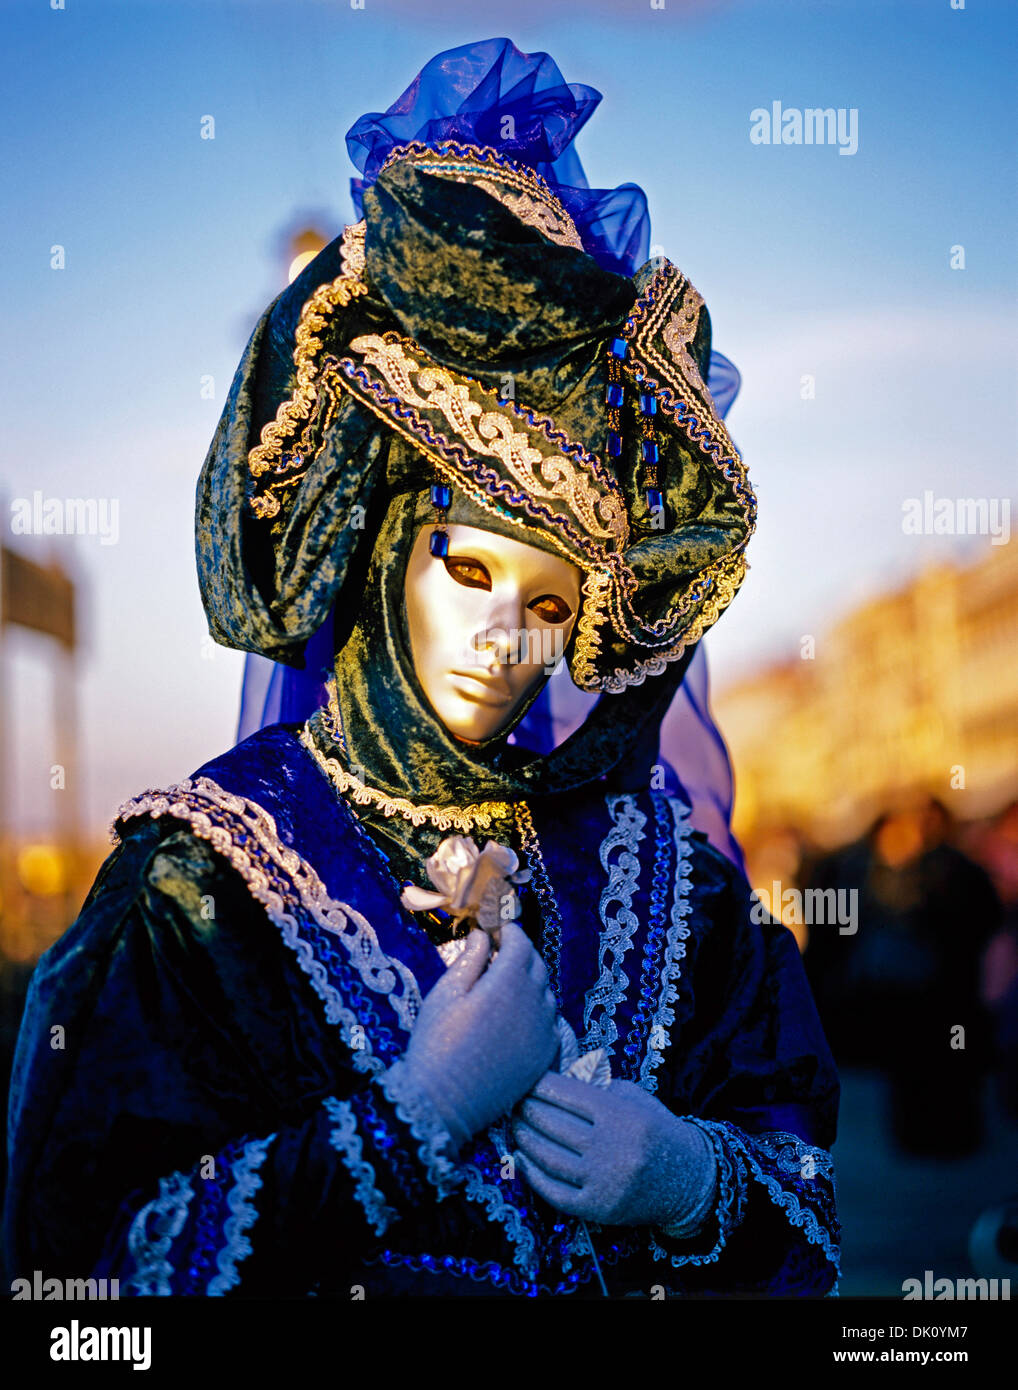 Participant in costume at the annual masked Carnival, Venice, Italy, Europe Stock Photo